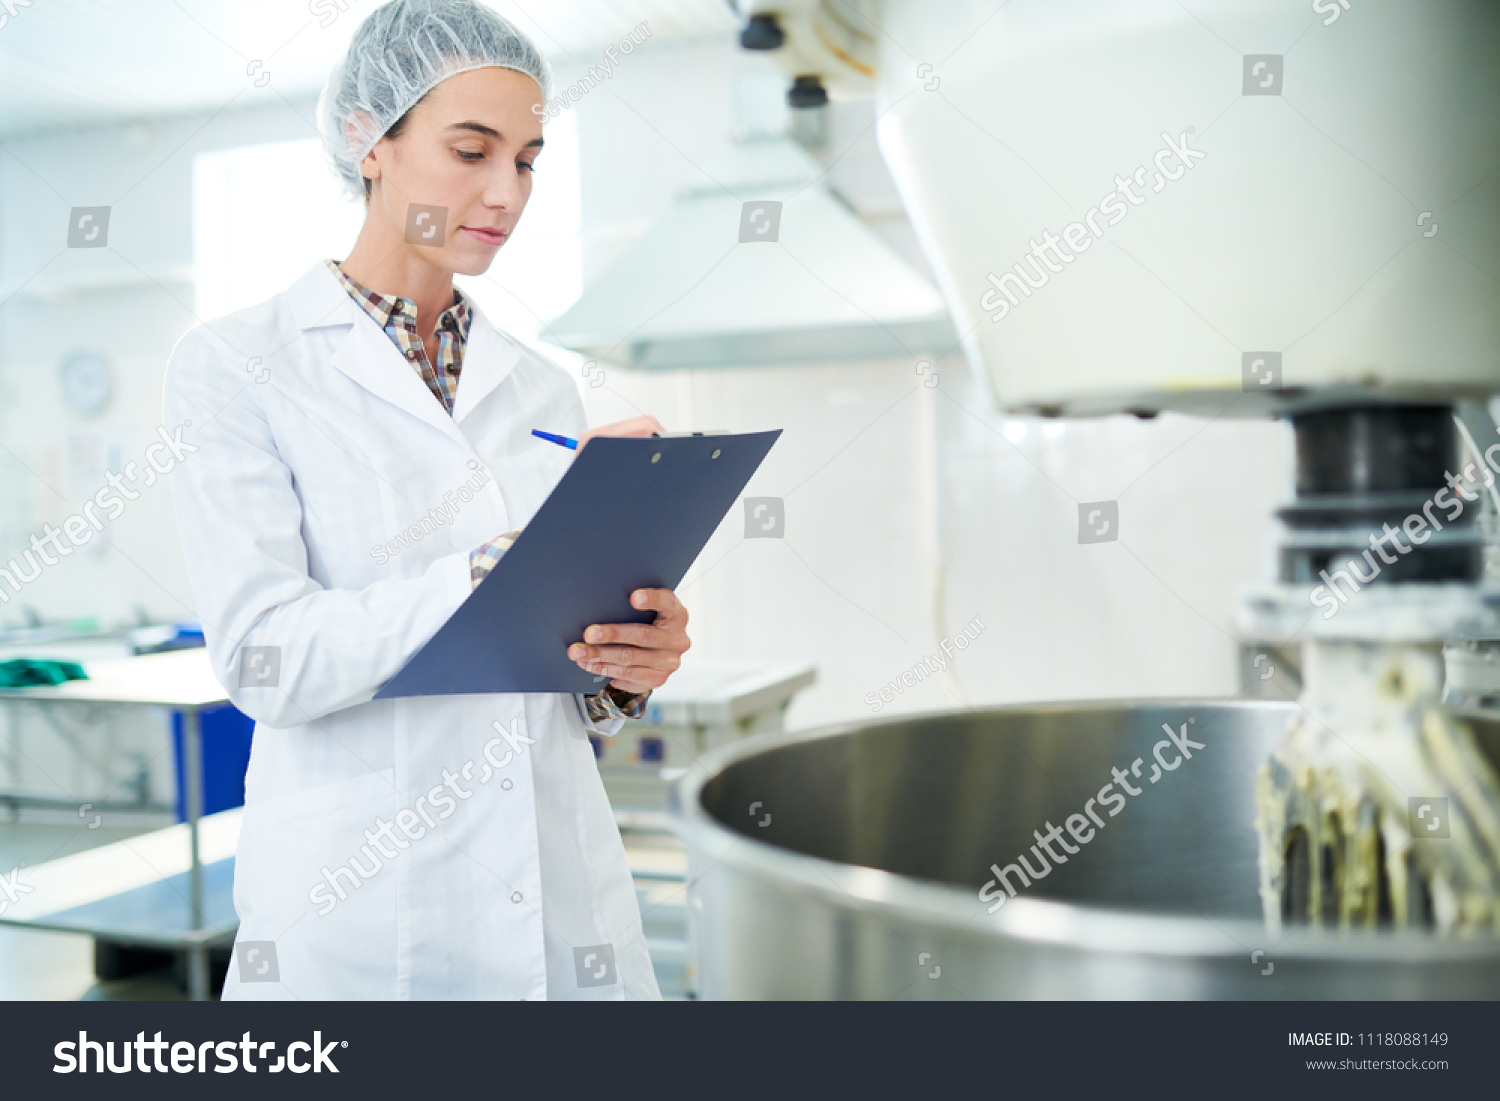 Confectionery factory employee standing in white coat near operating machinery and making notes.  #1118088149